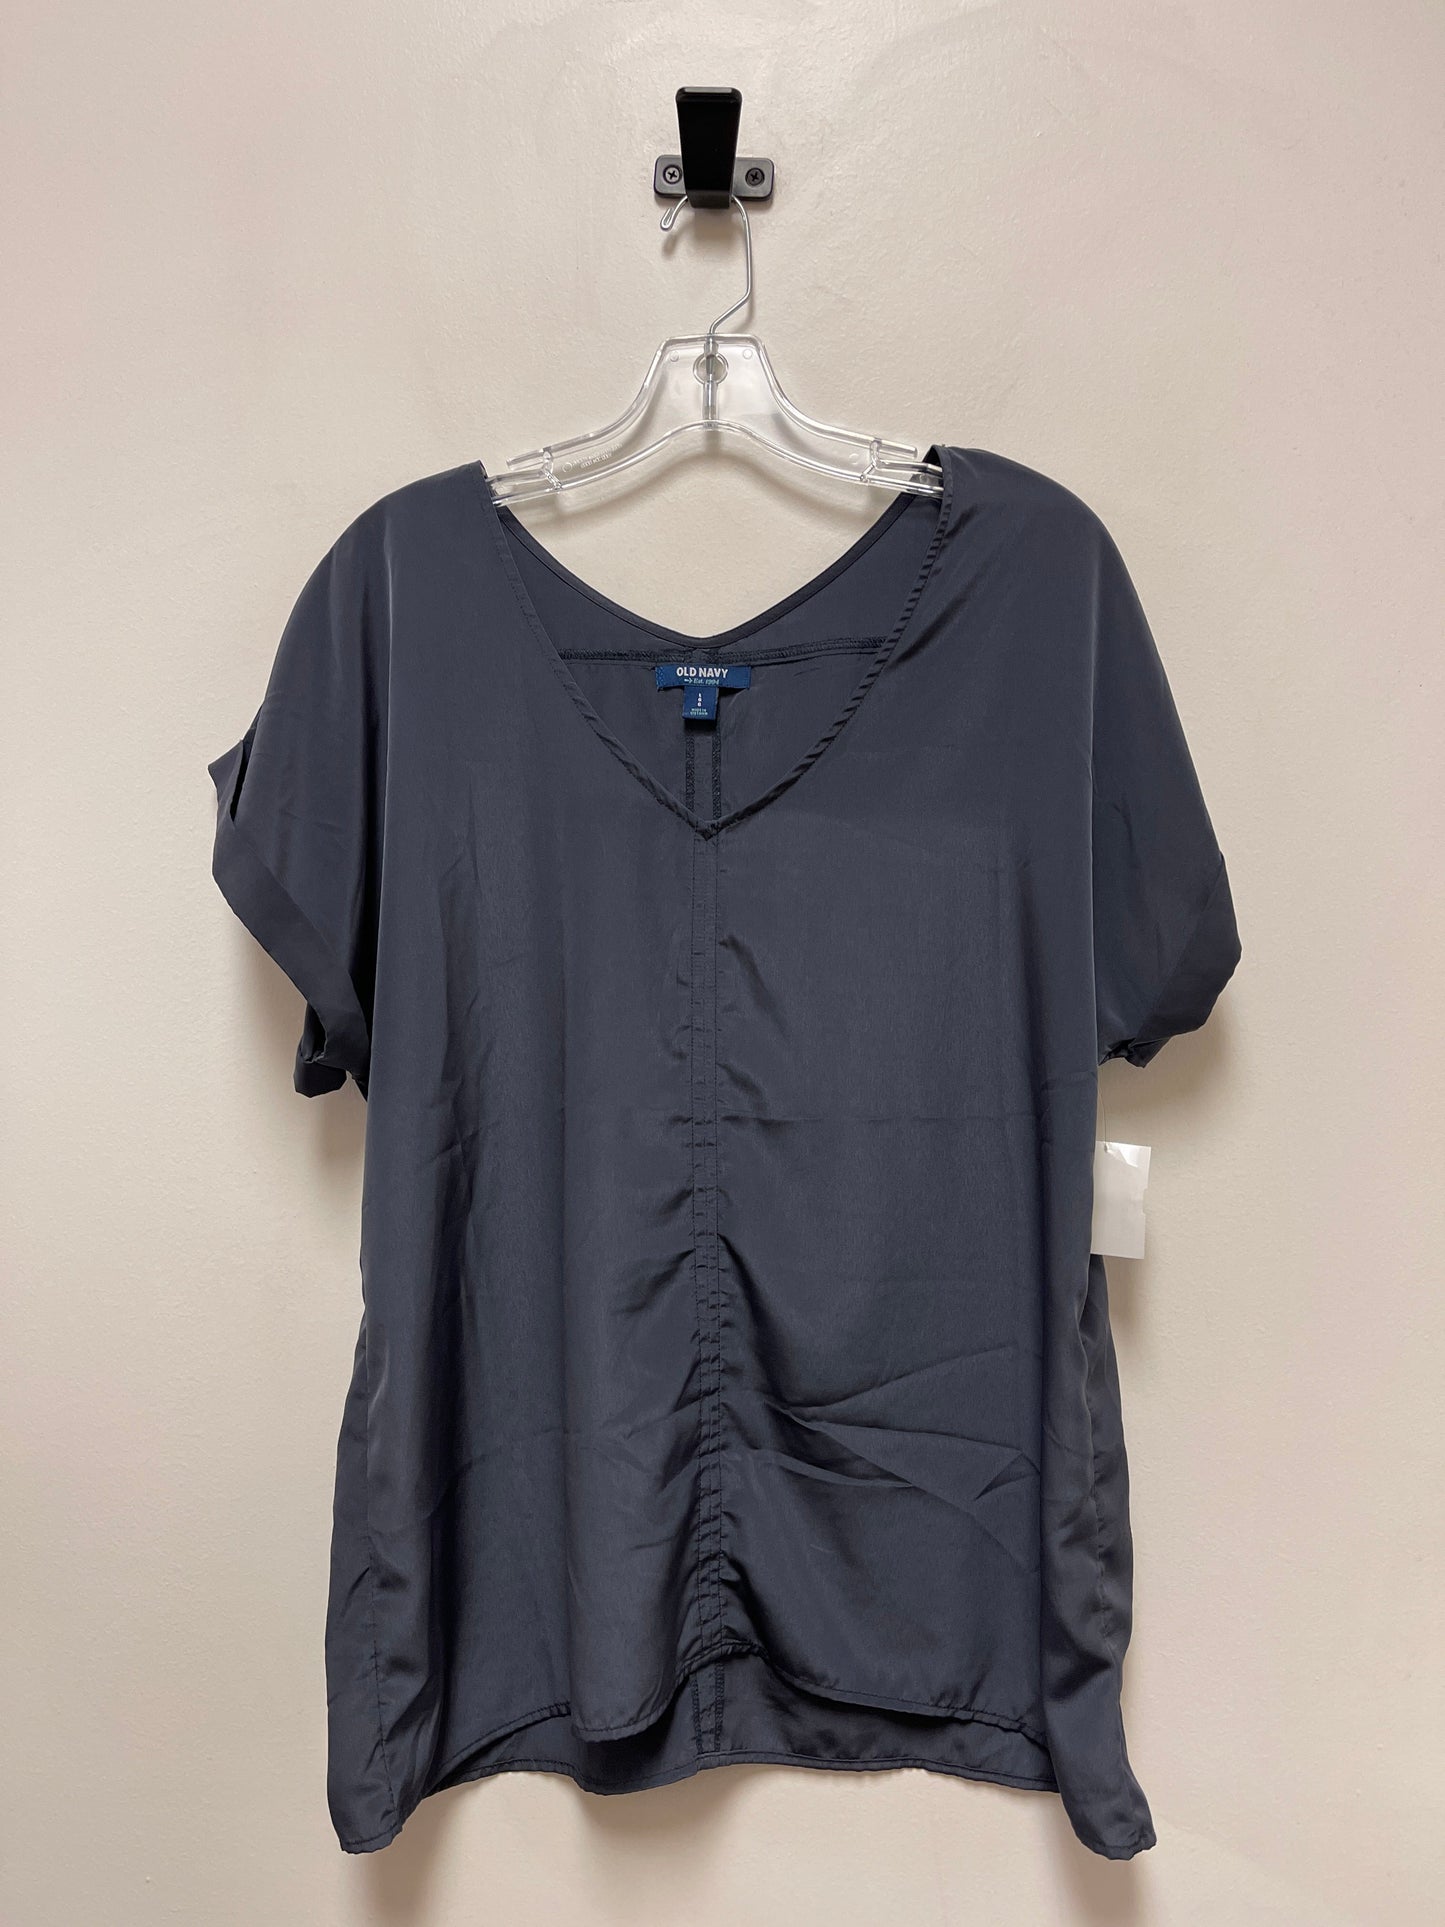 Grey Top Short Sleeve Old Navy, Size L